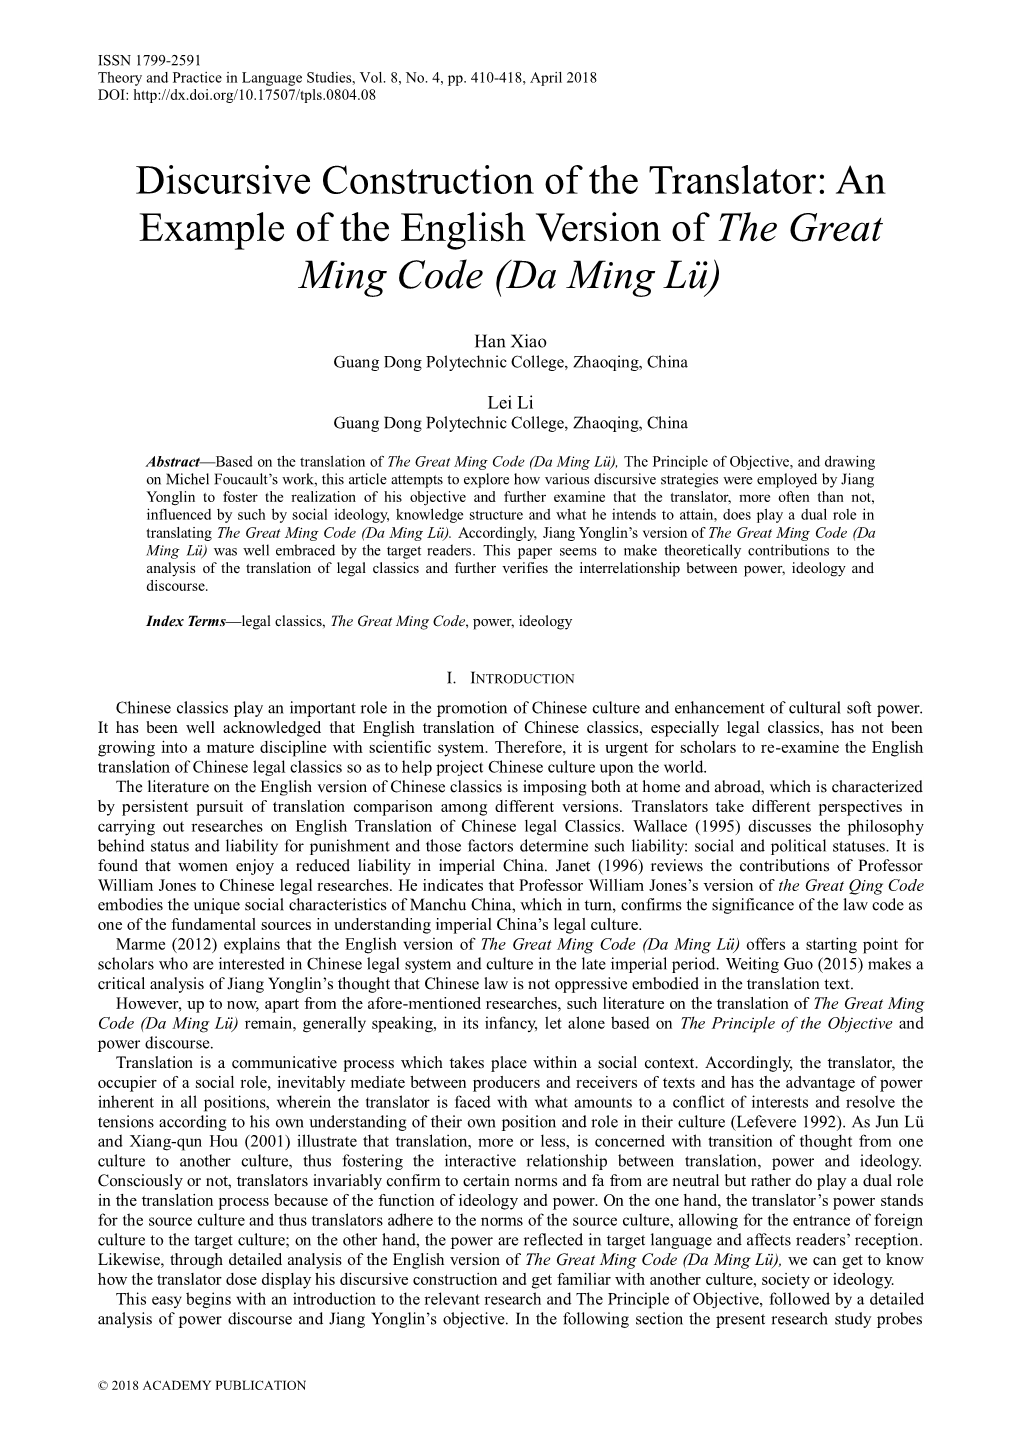 An Example of the English Version of the Great Ming Code (Da Ming Lü)